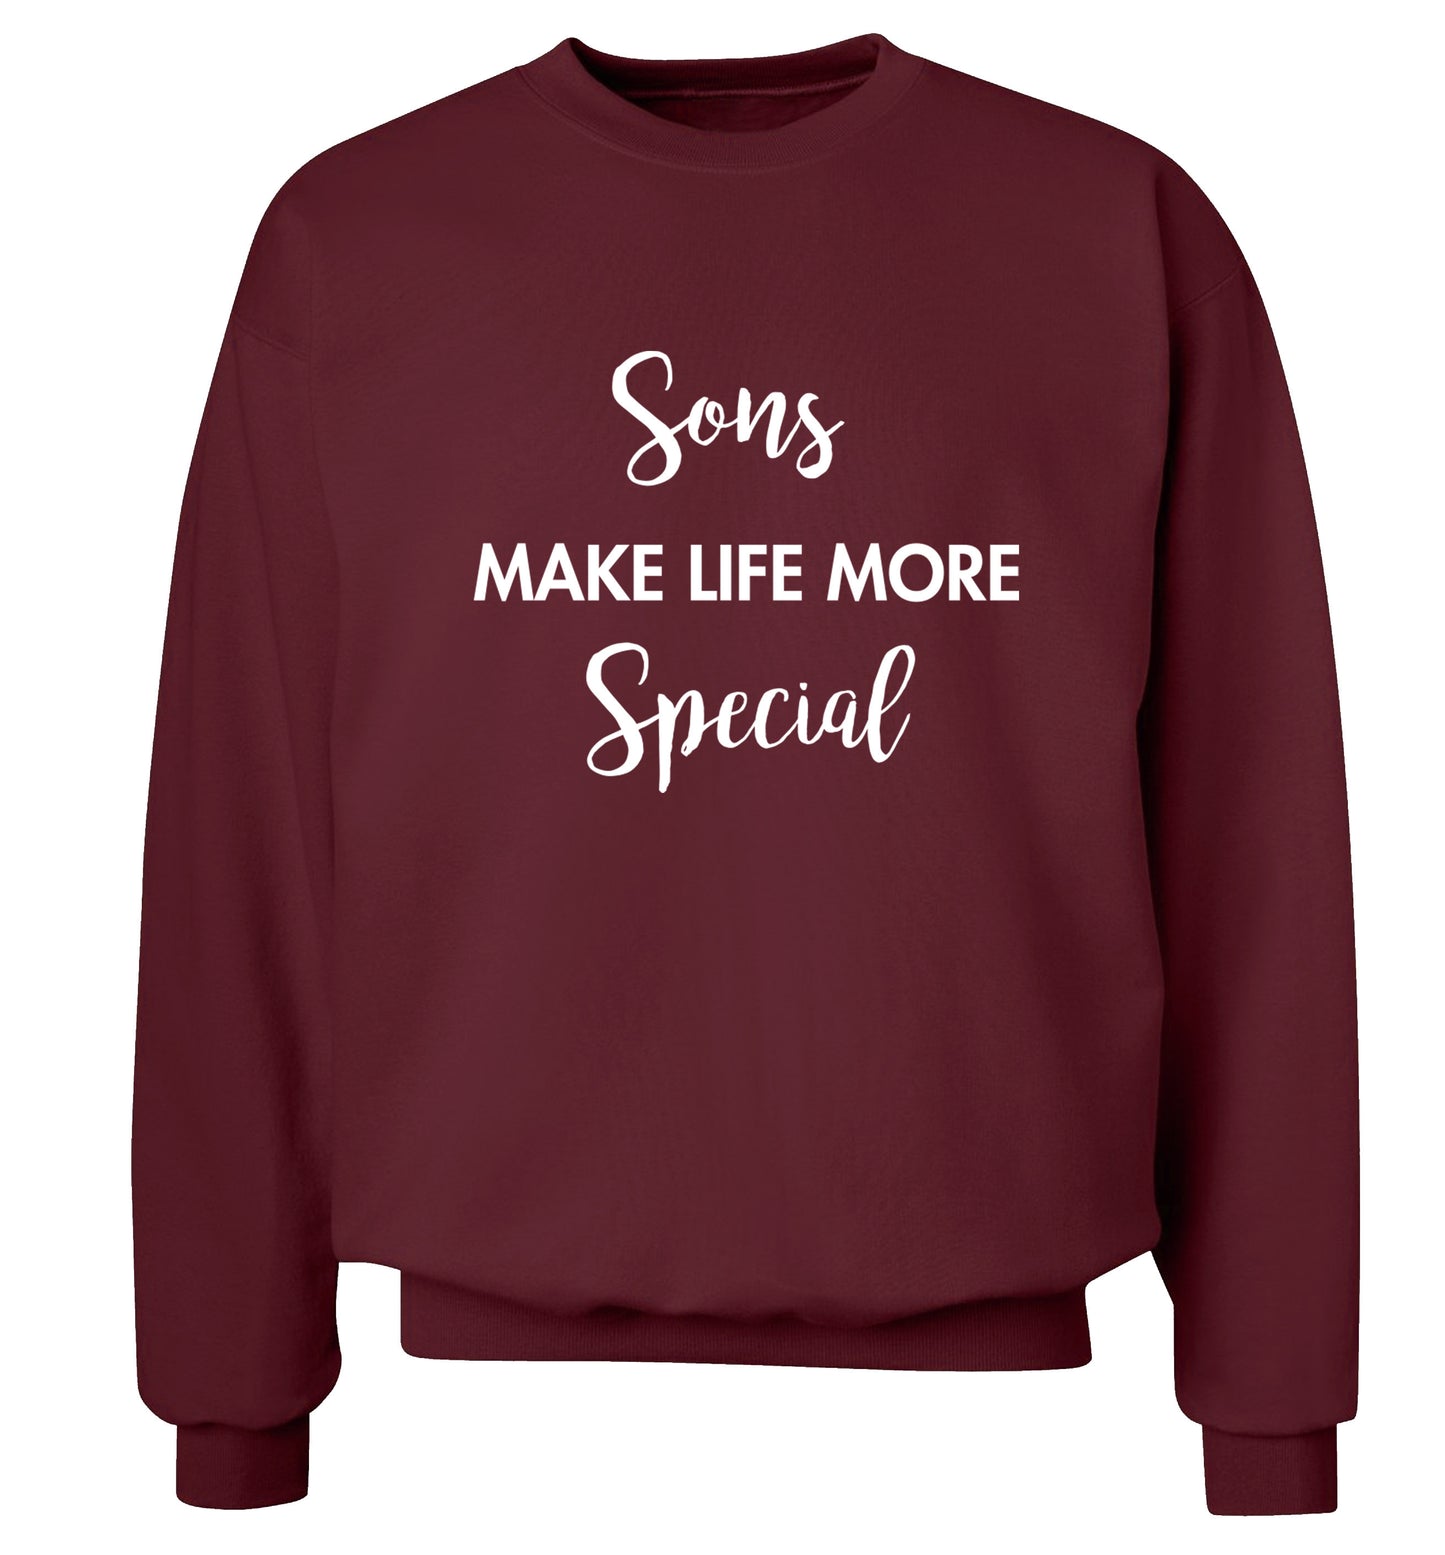 Daughters make life more special Adult's unisex maroon Sweater 2XL